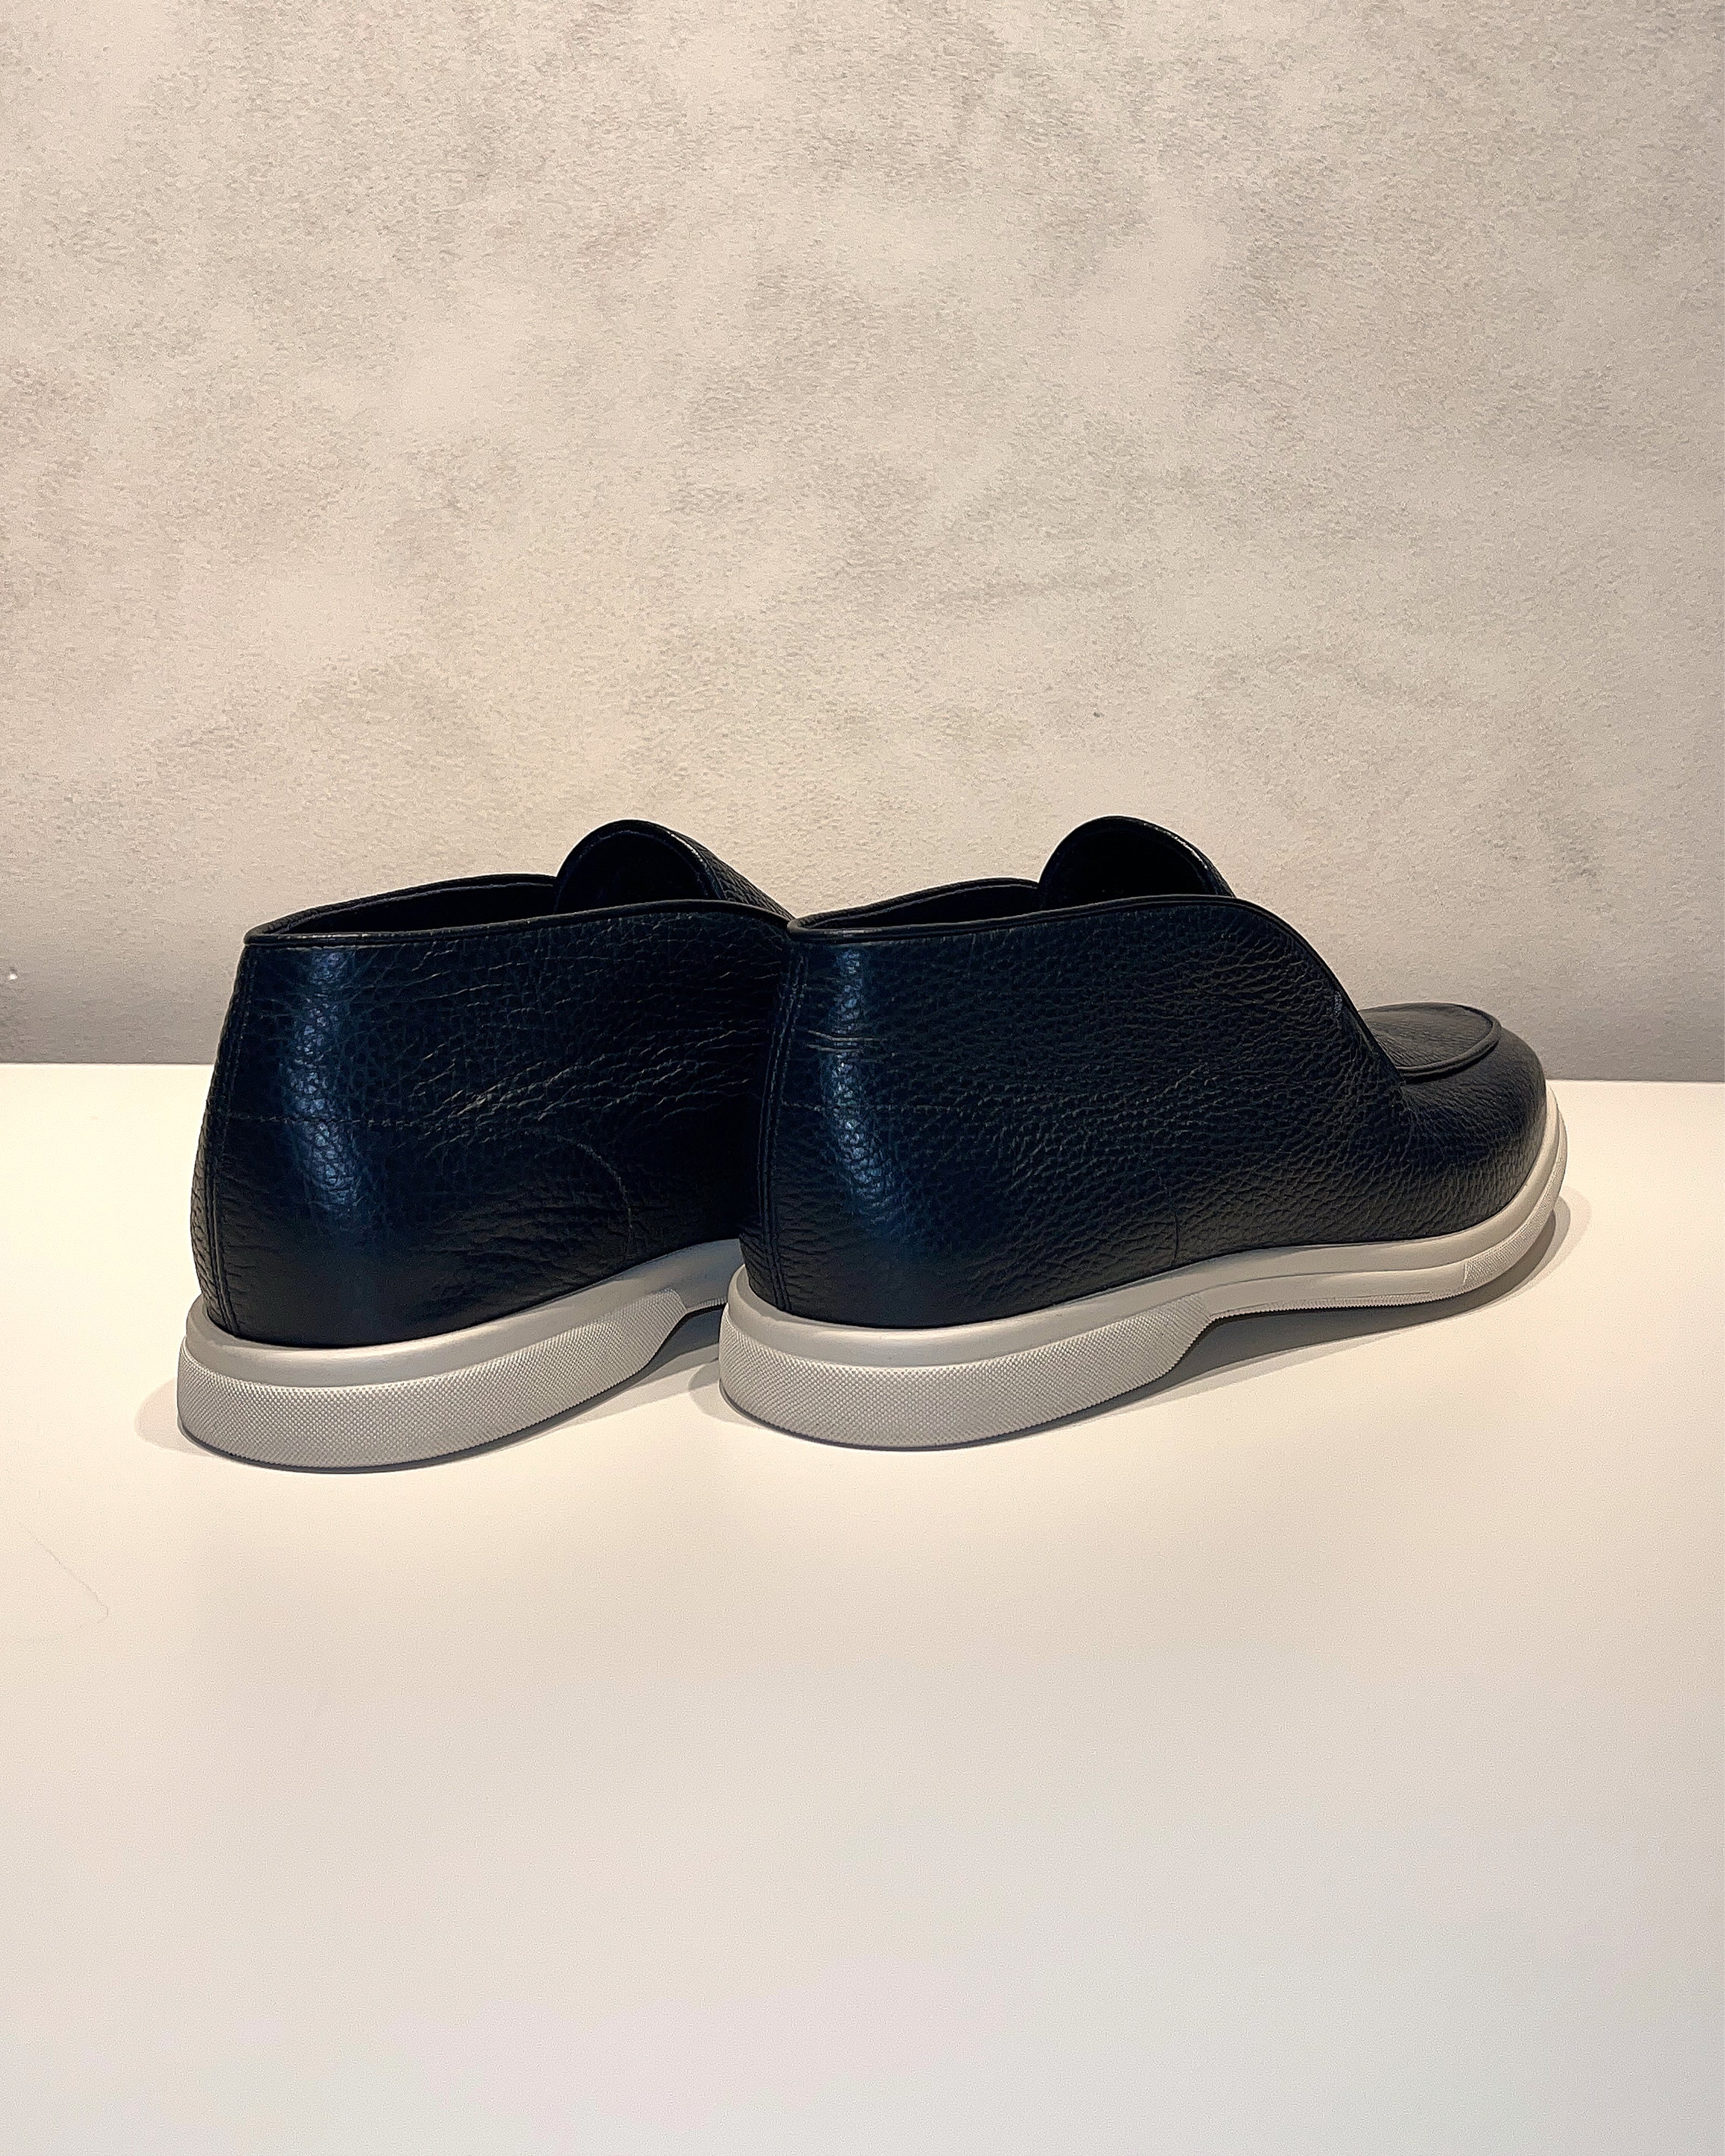 Sophisticated Italian Loafers Navy Blue Grained Calf